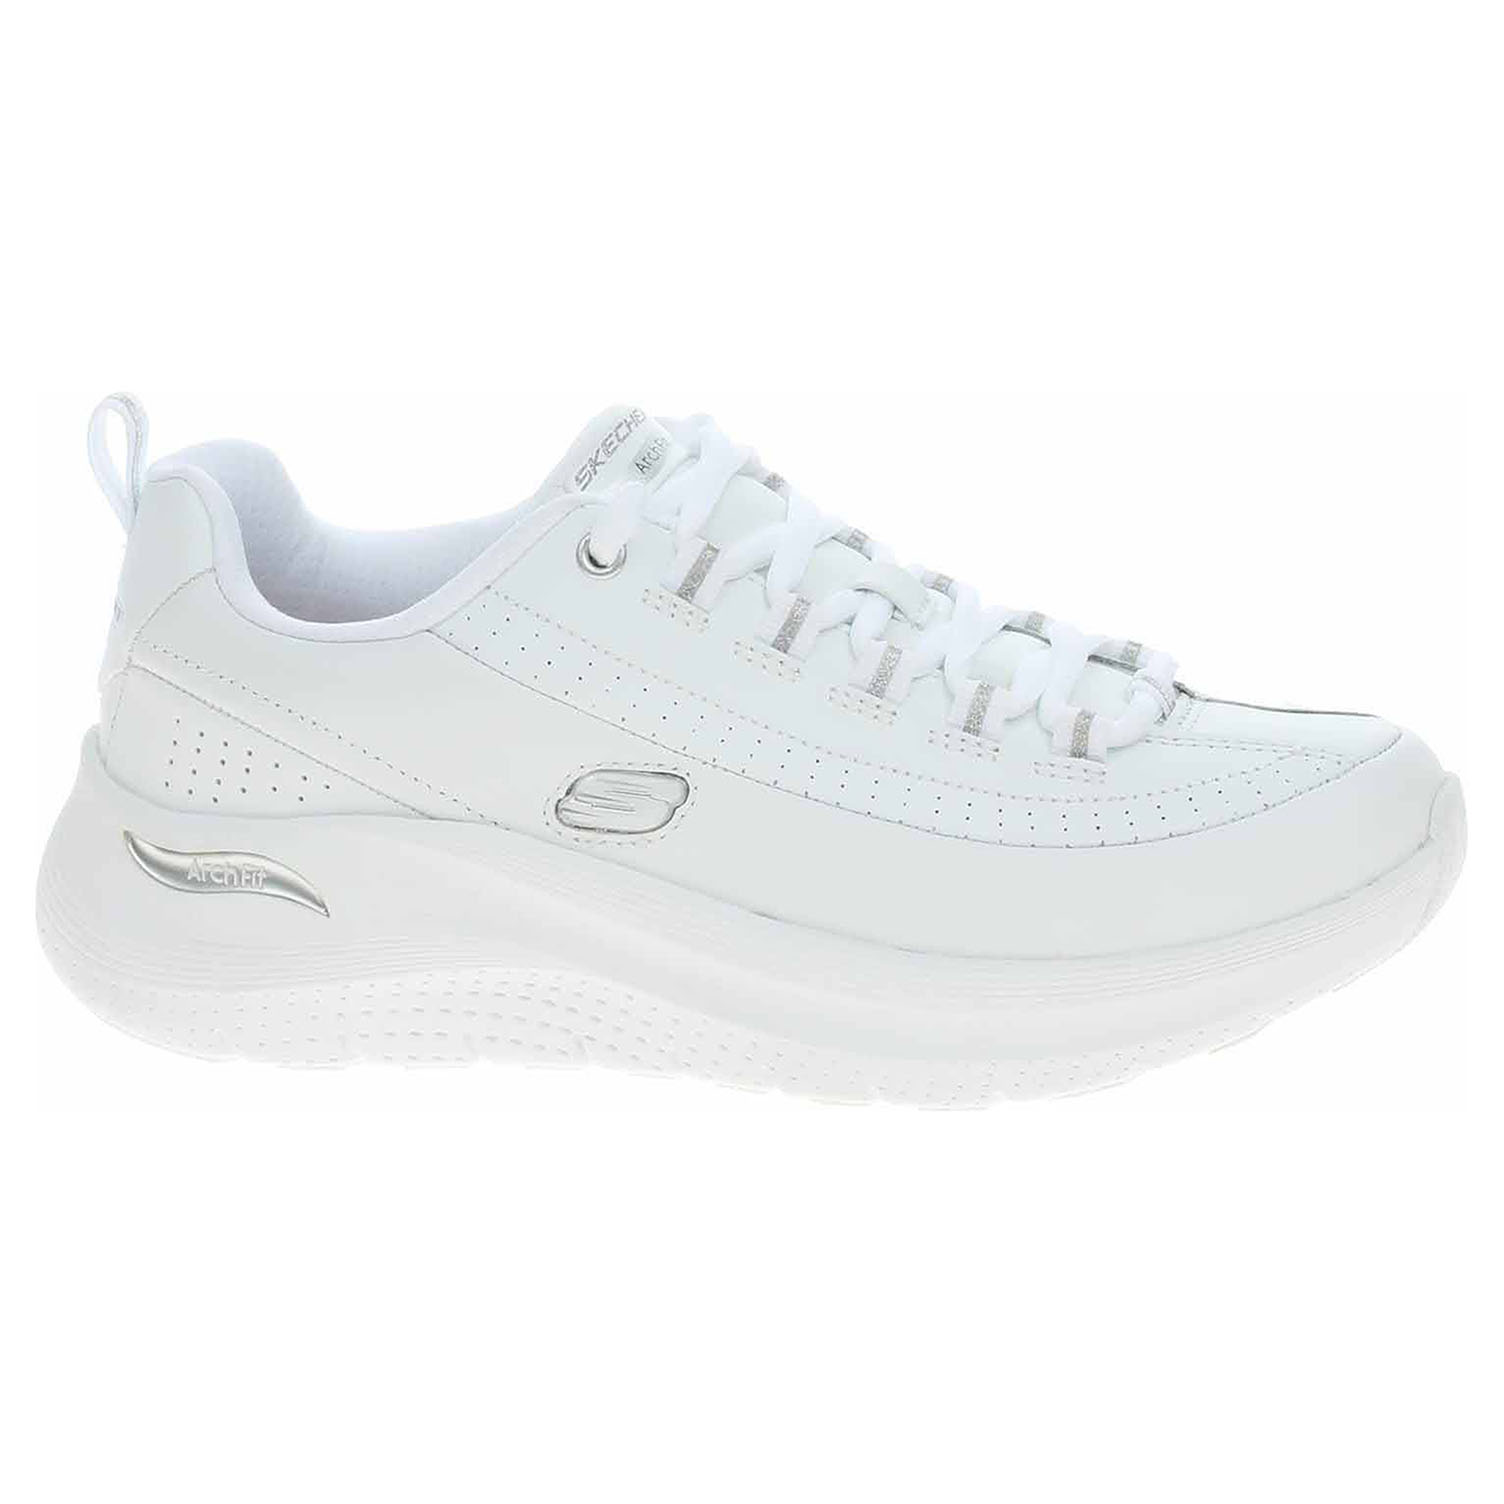 Skechers Arch Fit 2.0 - Star Bound white-silver